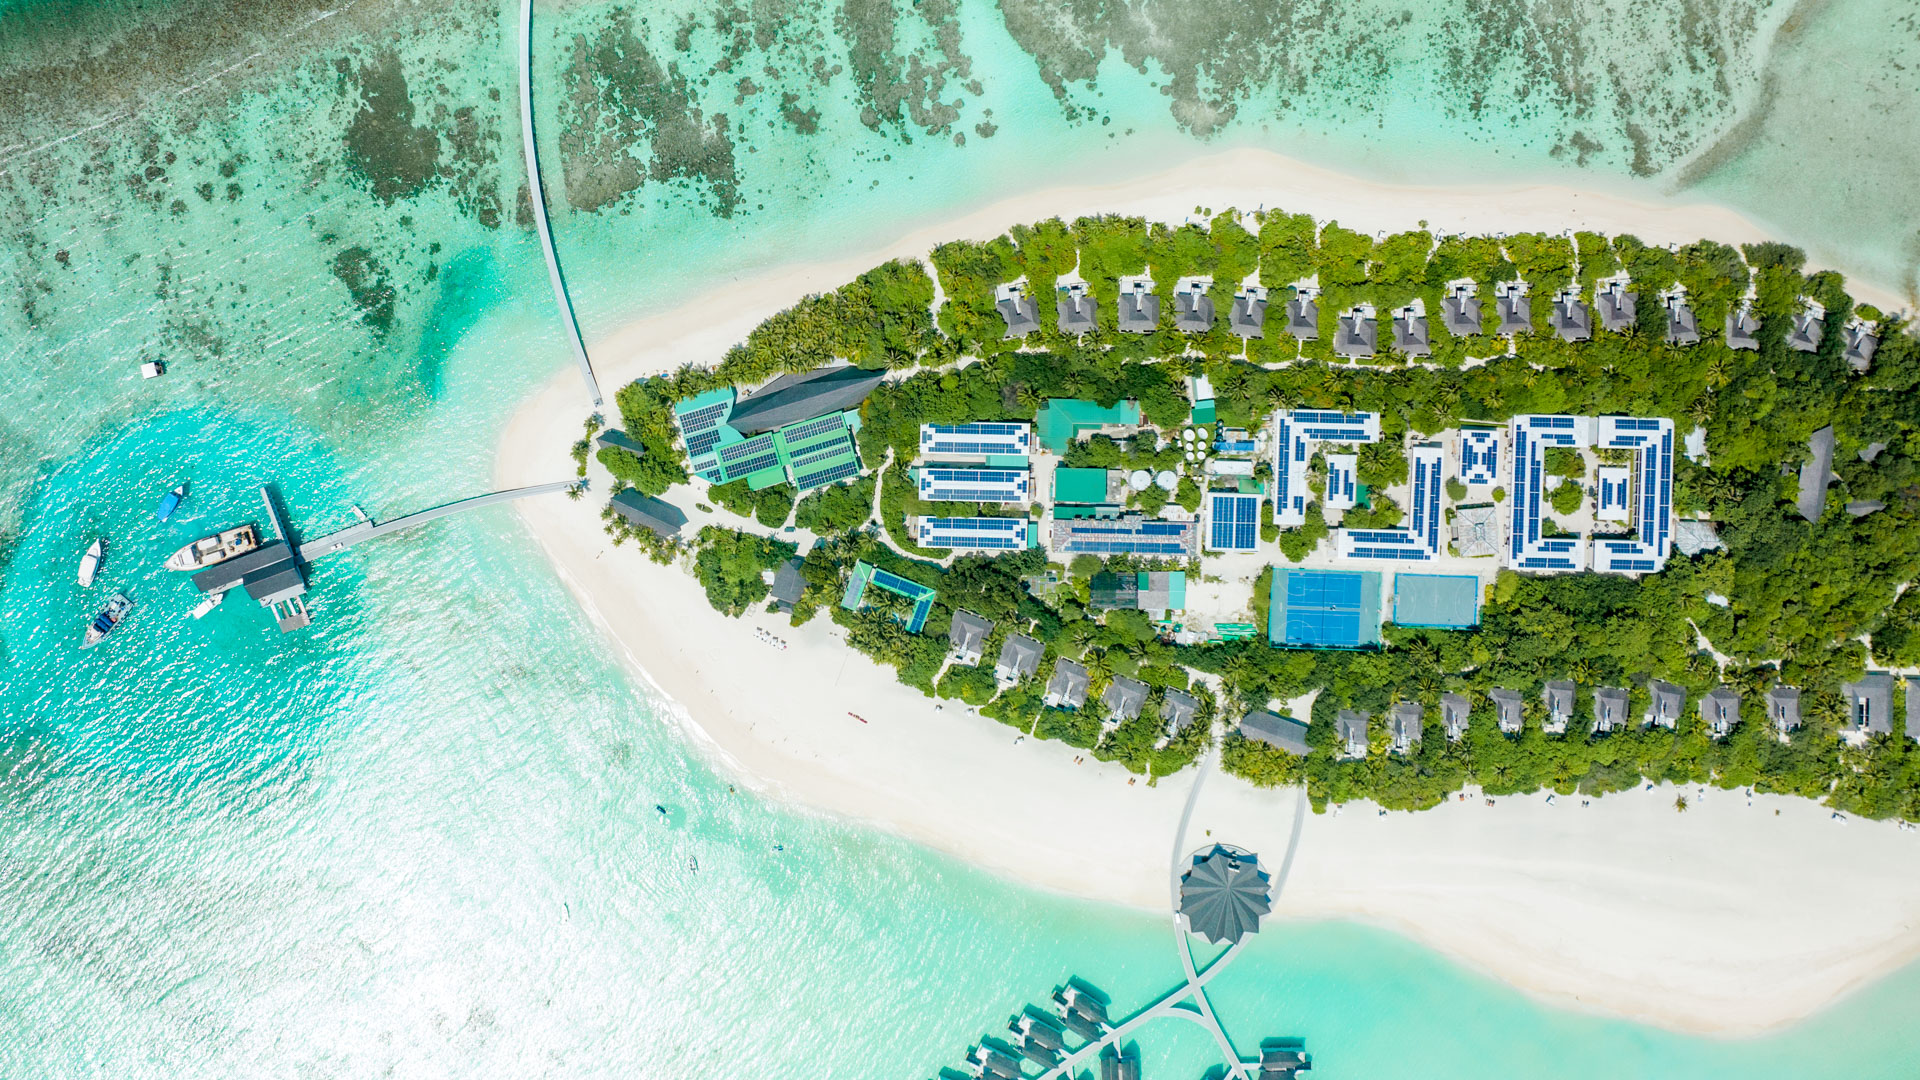 Aerial view of a large Rooftop solar PV system by Swimsol at Movenpick Maldives